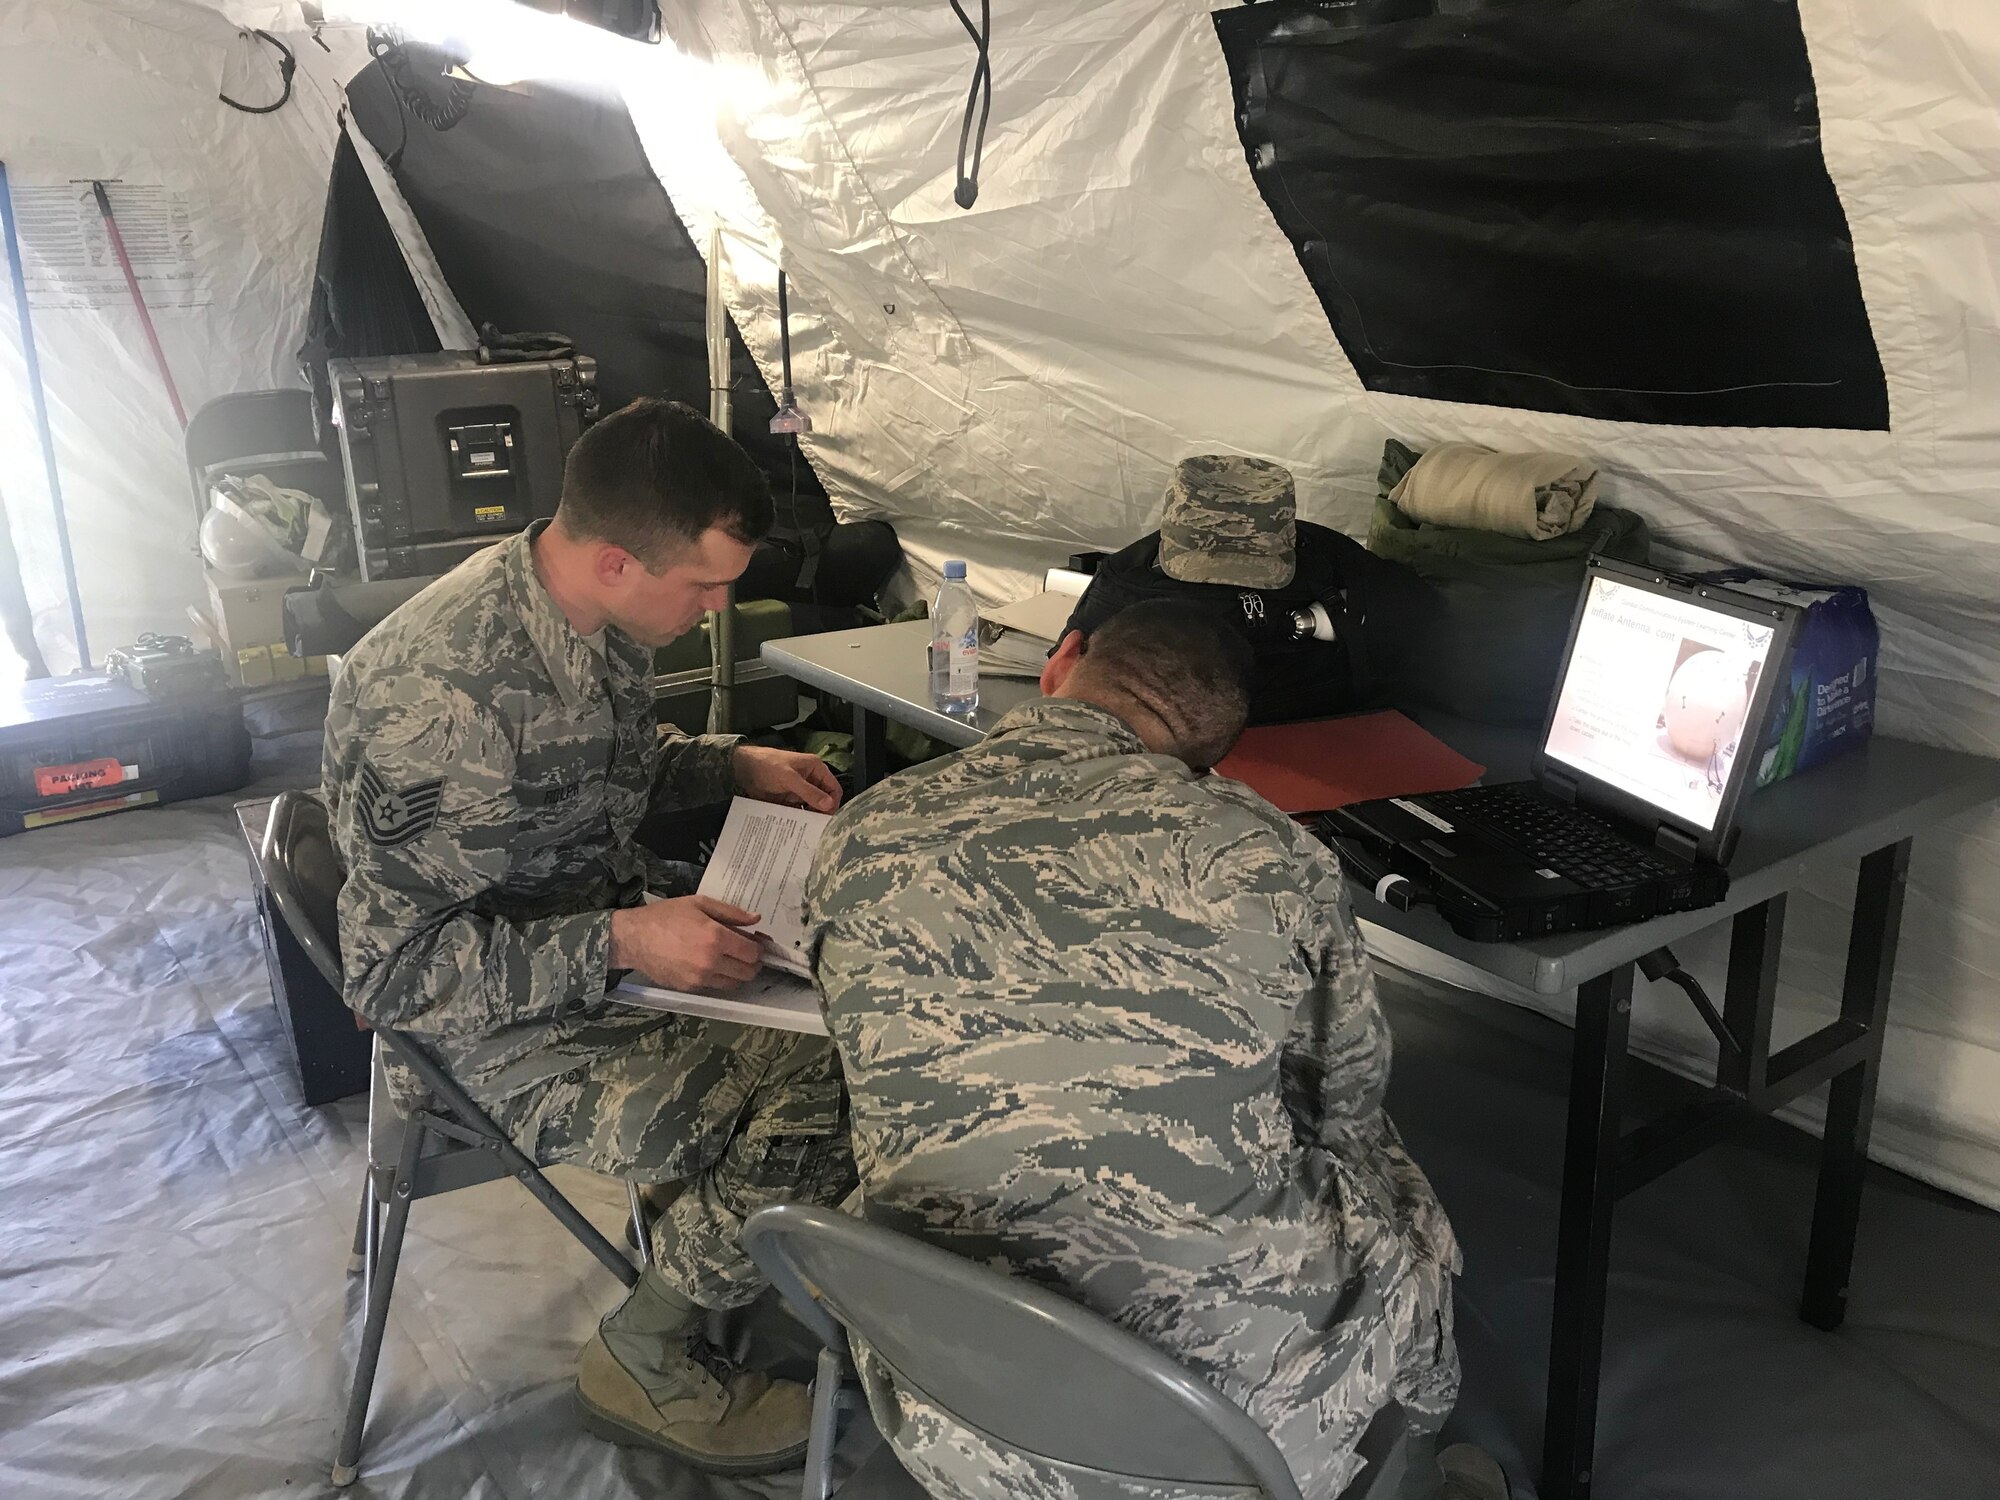 Members of the 263rd Combat Communications Squadron participate in the Combat Communications (CBC) Rodeo while at Robins Air Force Base, Georgia, Mar. 7, 2019. The CBC Rodeo is a Nationwide training exercise that brings together Combat Communications Squadrons from across the country to train in techniques and skills while networking to increase the potential success of future deployments.